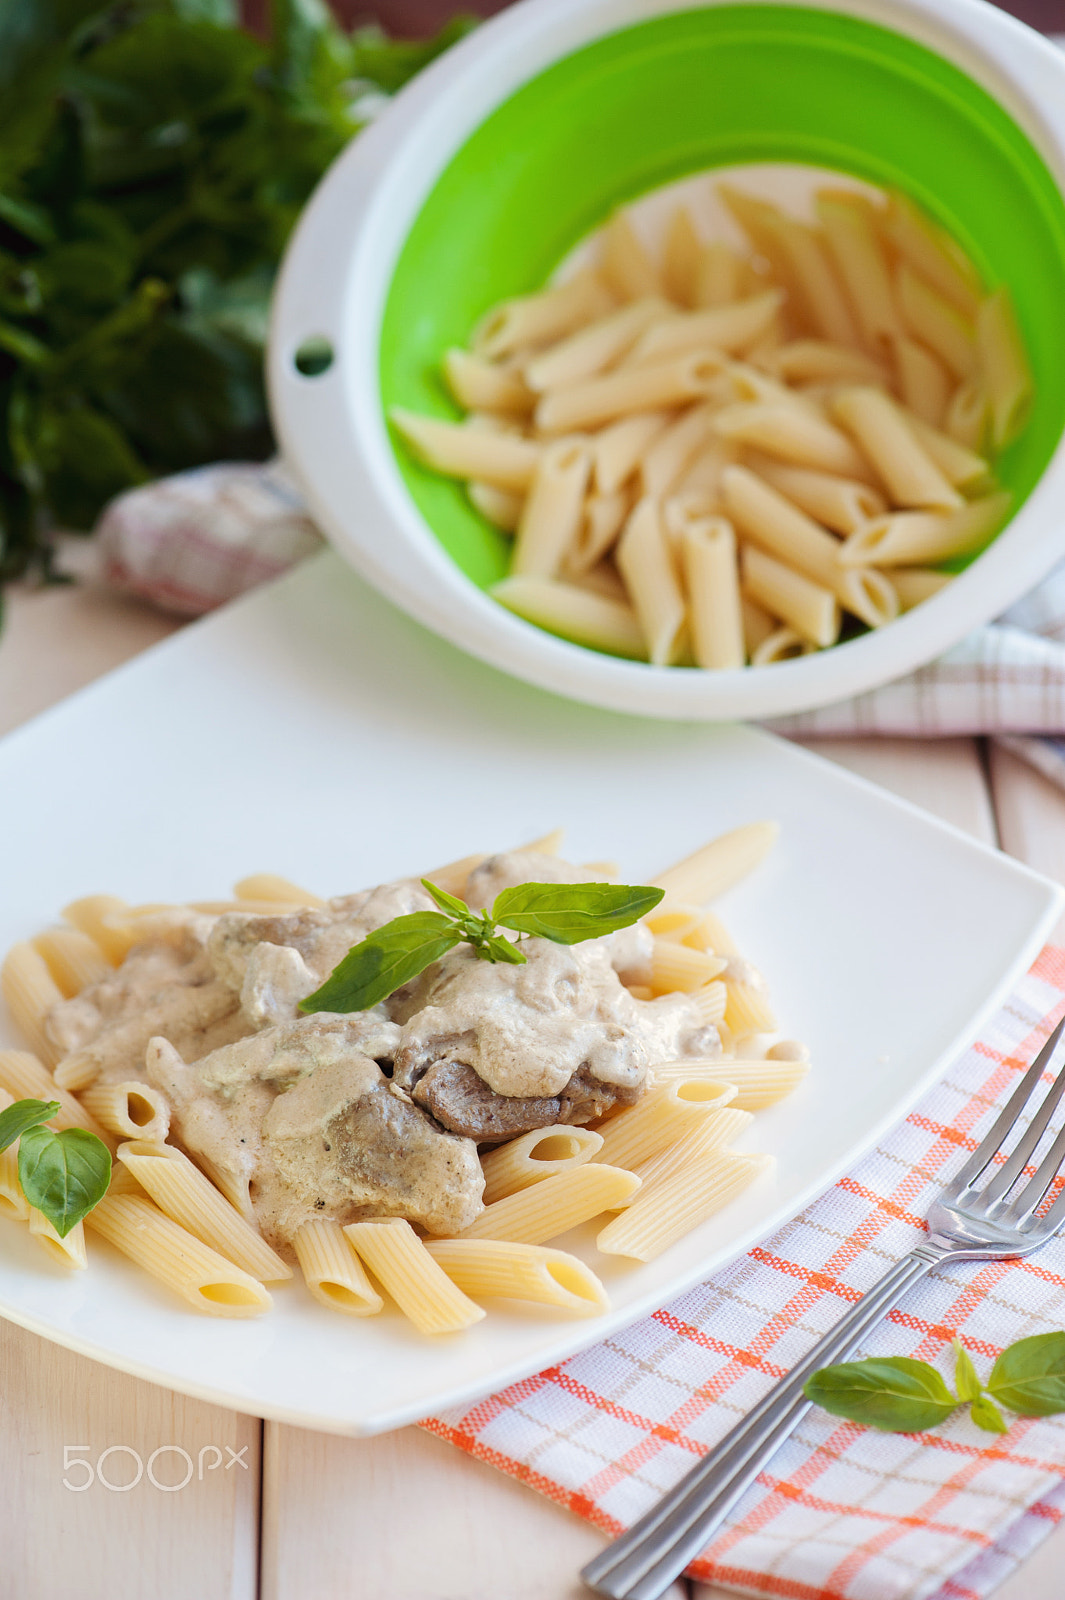 Nikon D700 sample photo. Penne pasta with meat and white sauce on a plate photography